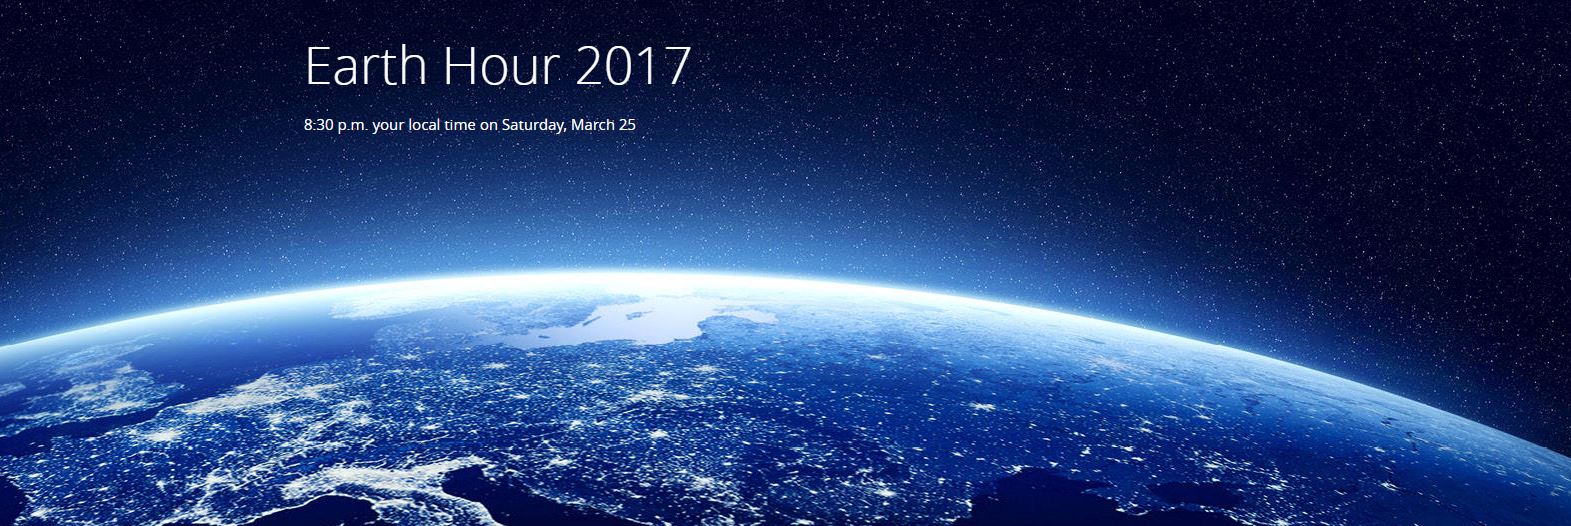 Earth Hour 2017 poster.